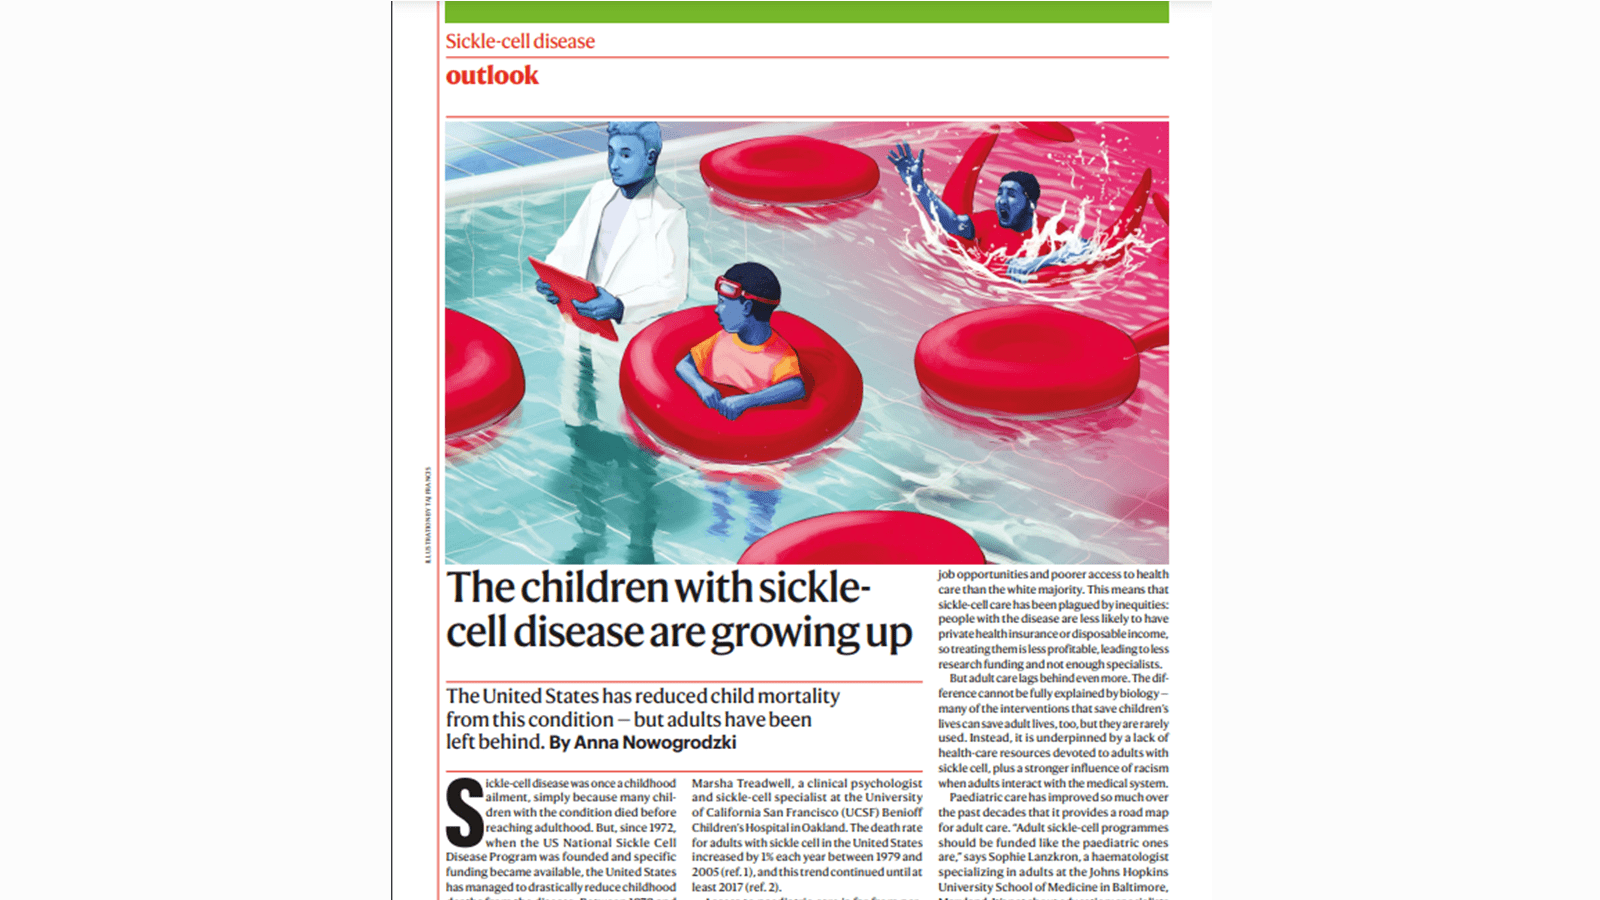 Screenshot of a supplement in the journal Nature featuring red blood cells as life preservers